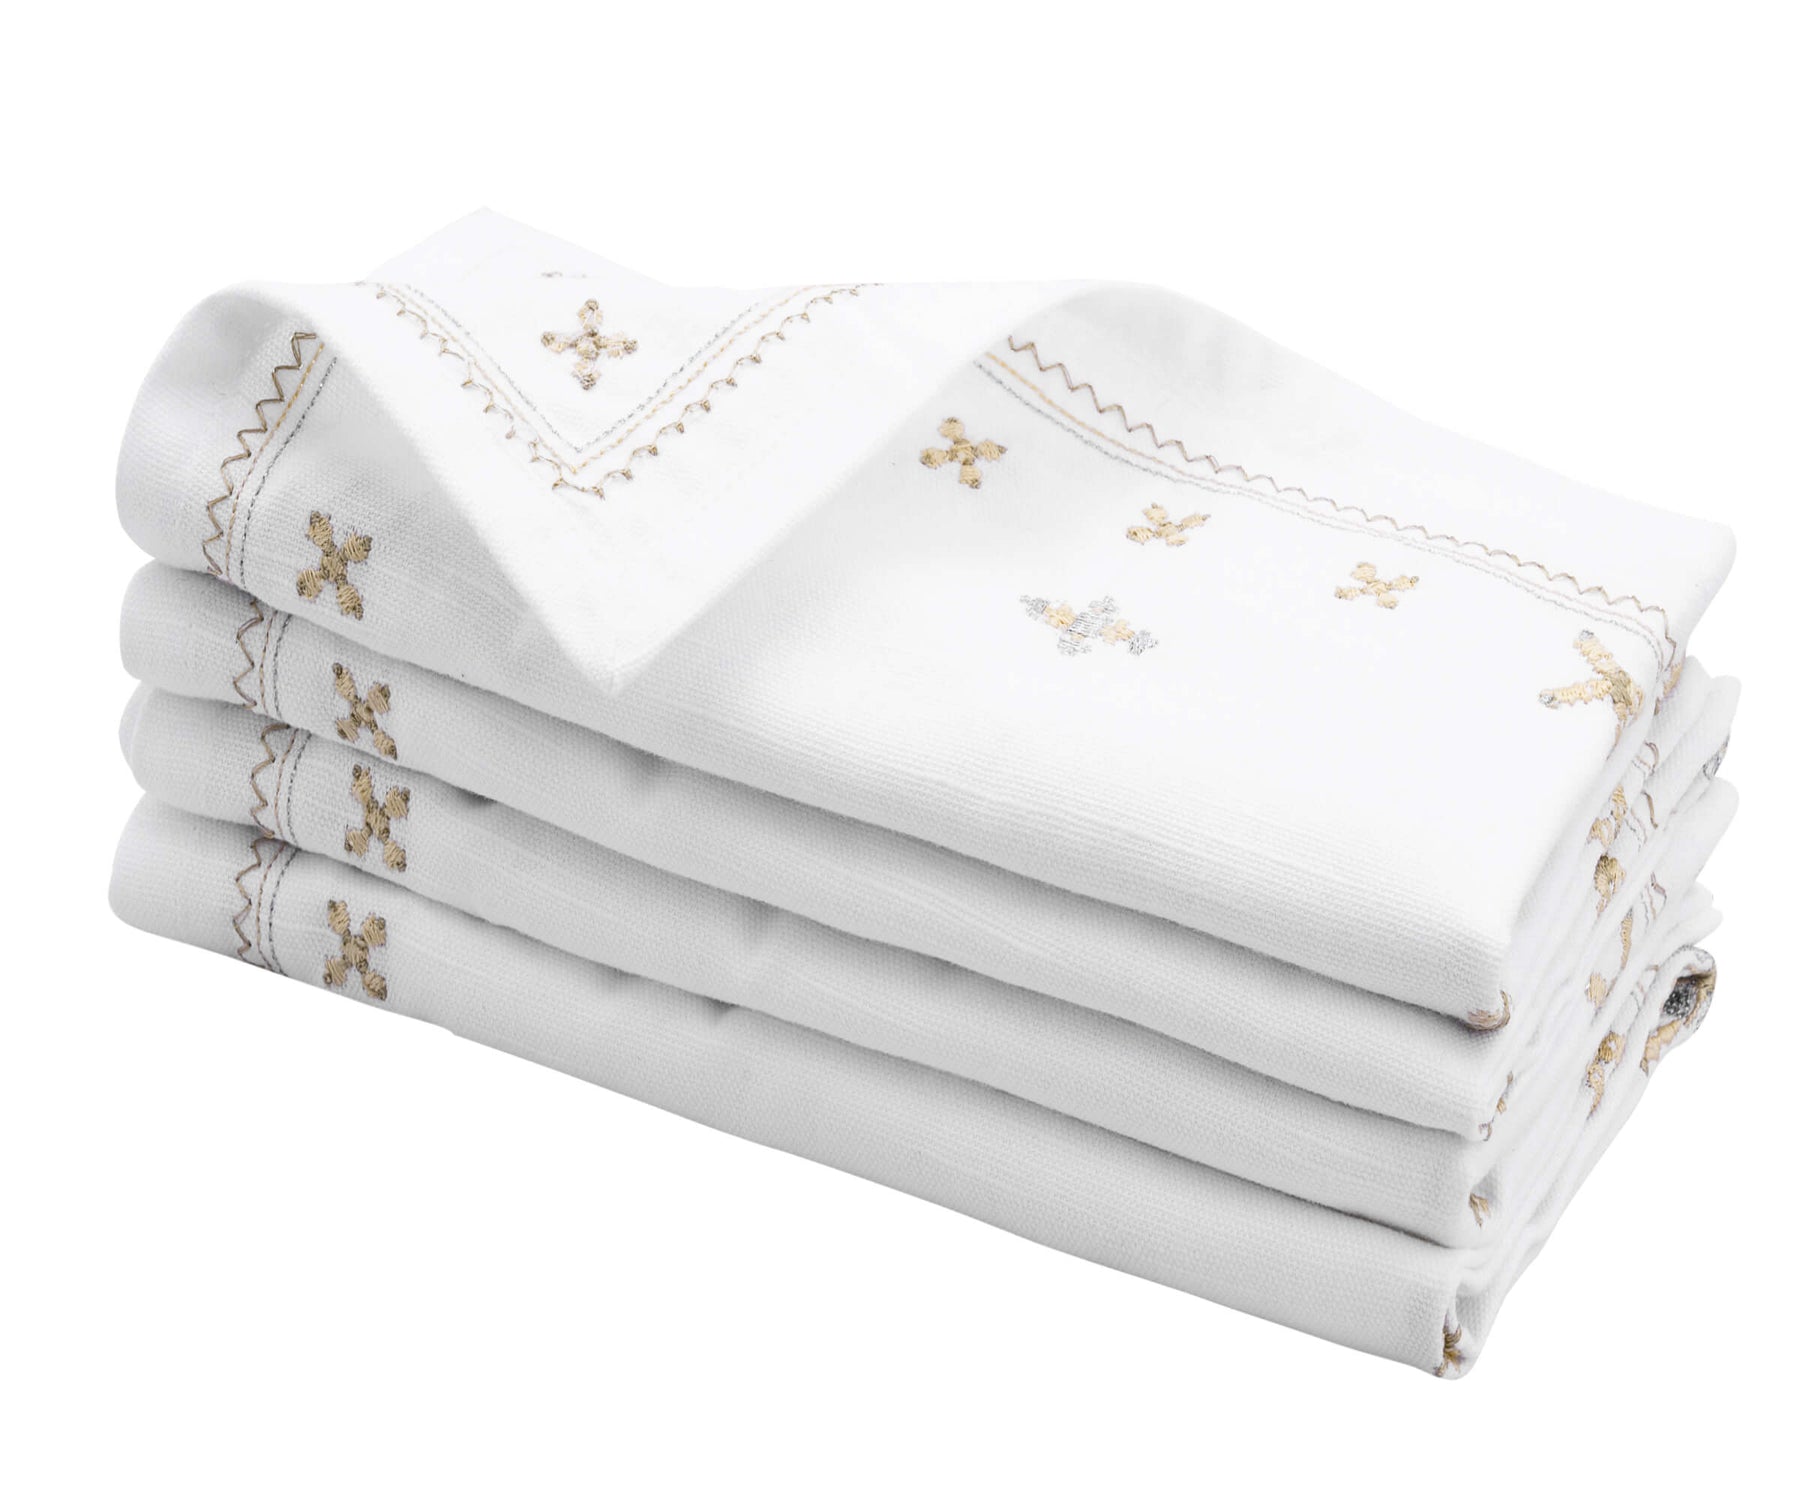 Embroidered napkins feature intricate and detailed designs created using embroidery techniques, adding elegance and sophistication to table settings